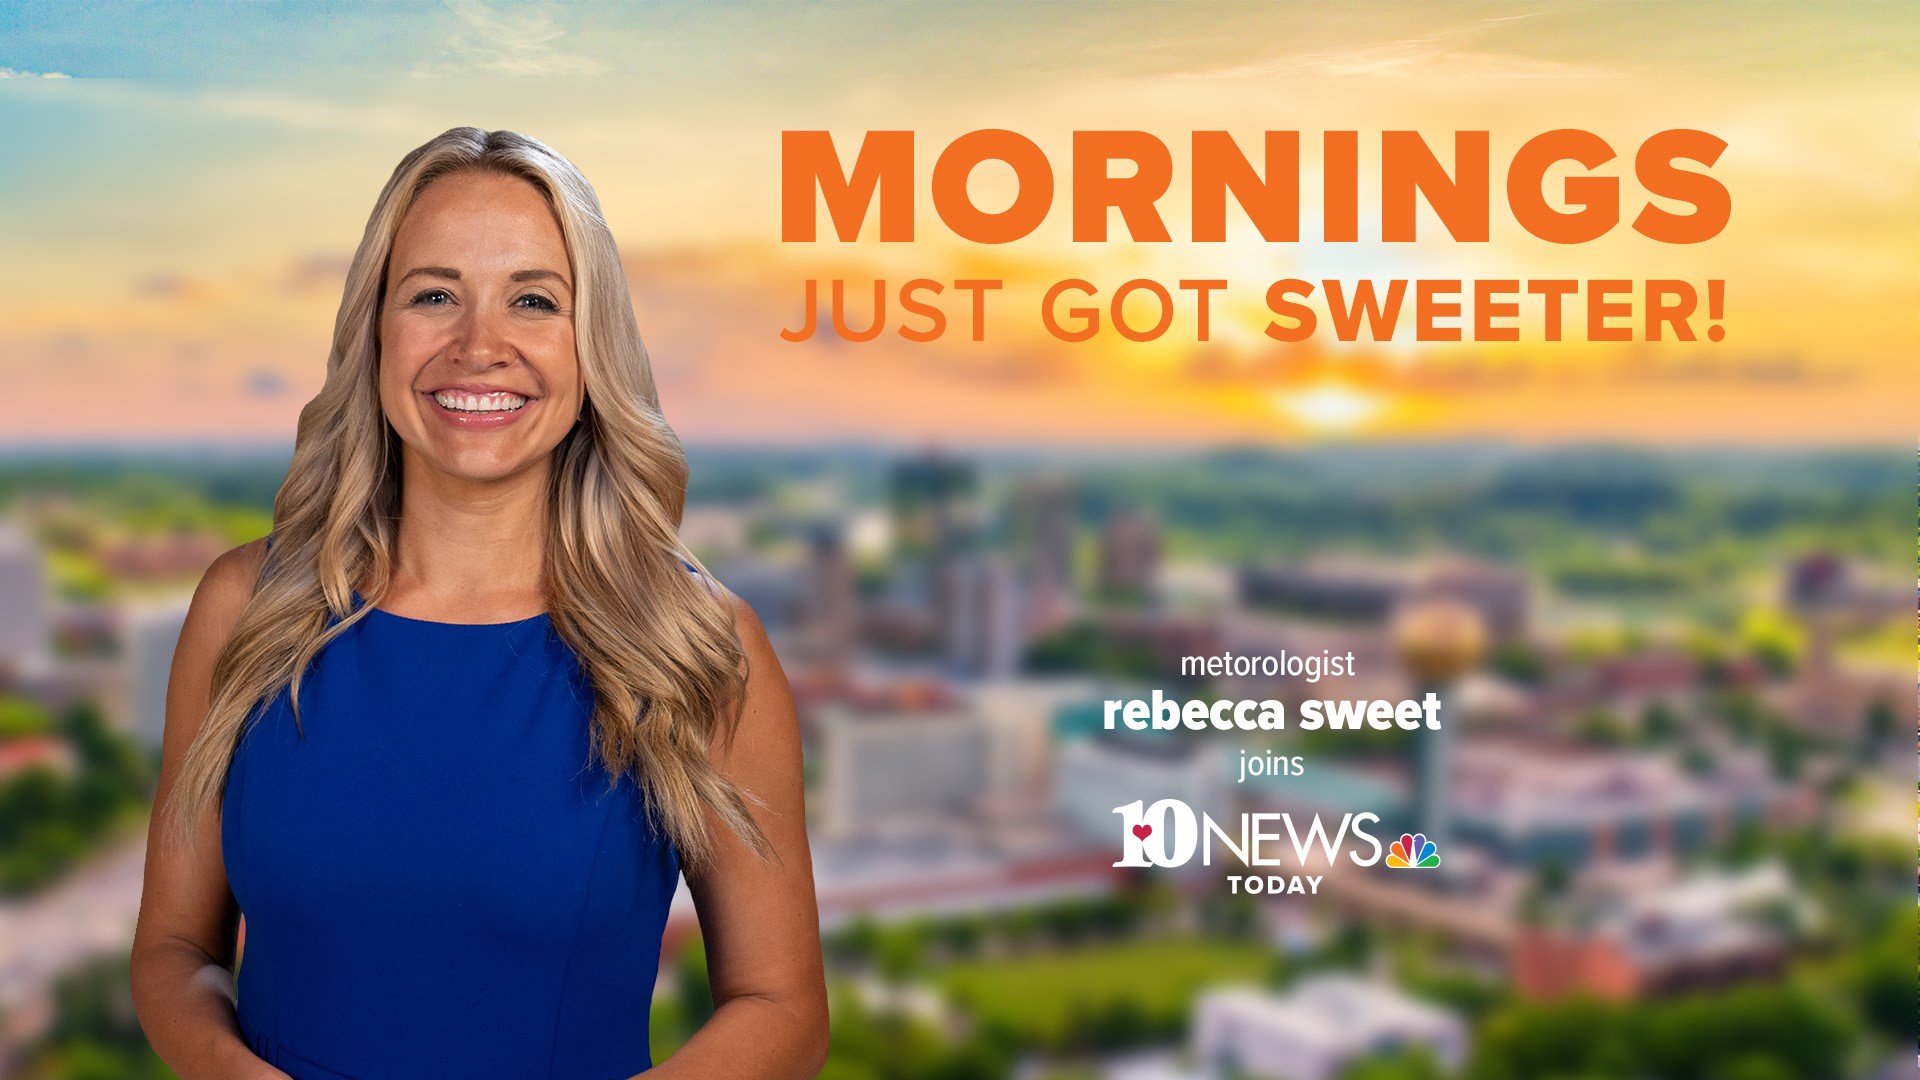 You'll be seeing a lot more of Rebecca on 10News Today! She will be taking over as our lead morning meteorologist.